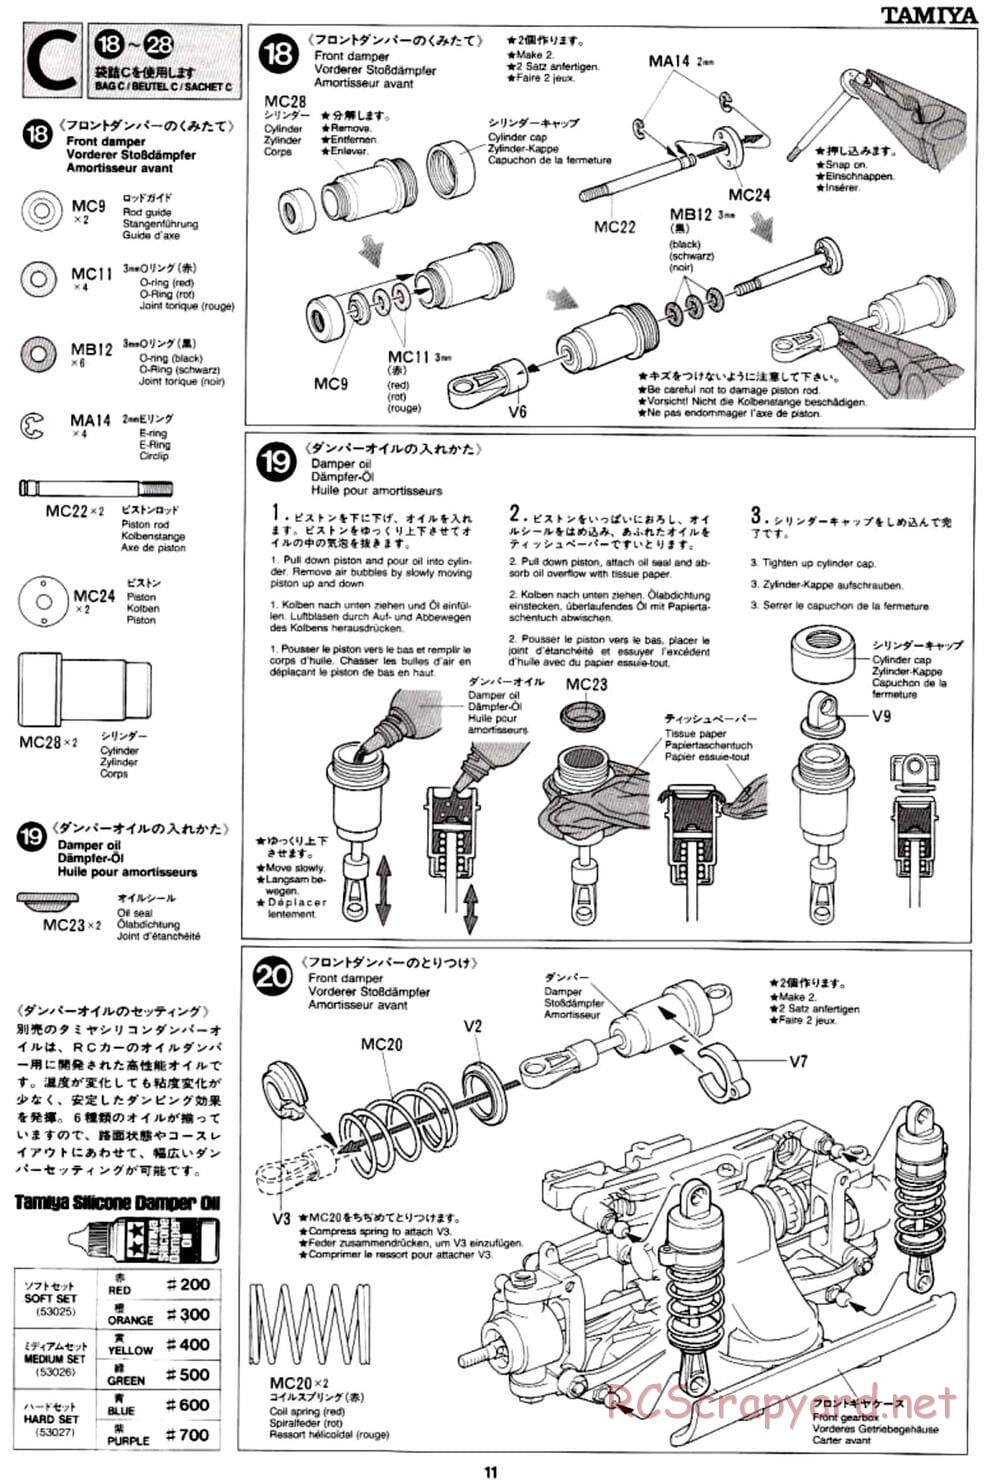 Tamiya - TA-03R TRF Special Edition Chassis - Manual - Page 11